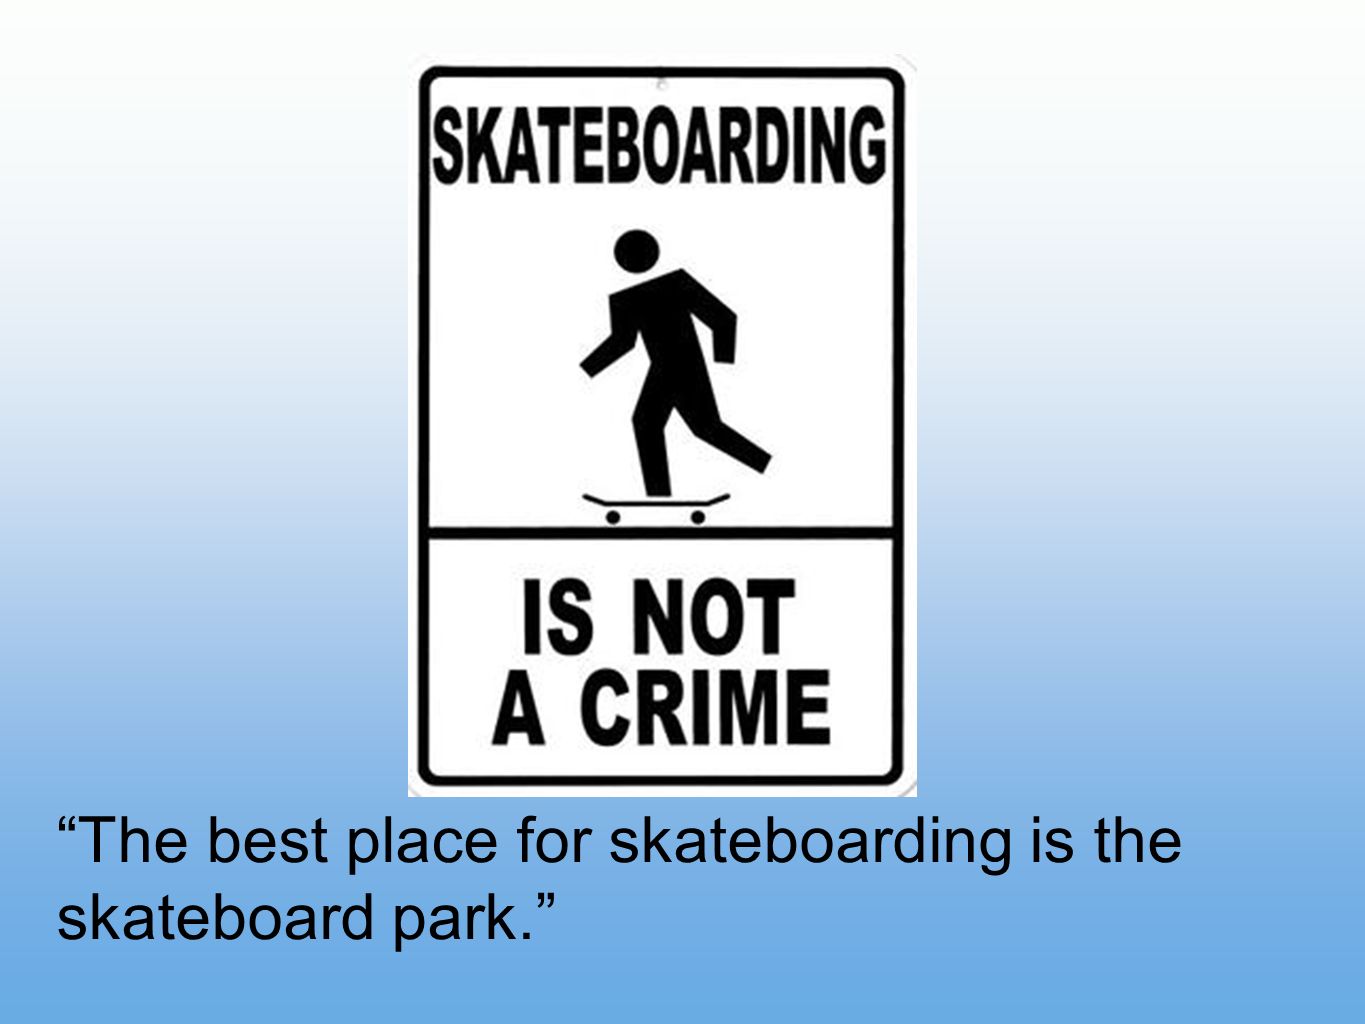 The best place for skateboarding is the skateboard park.